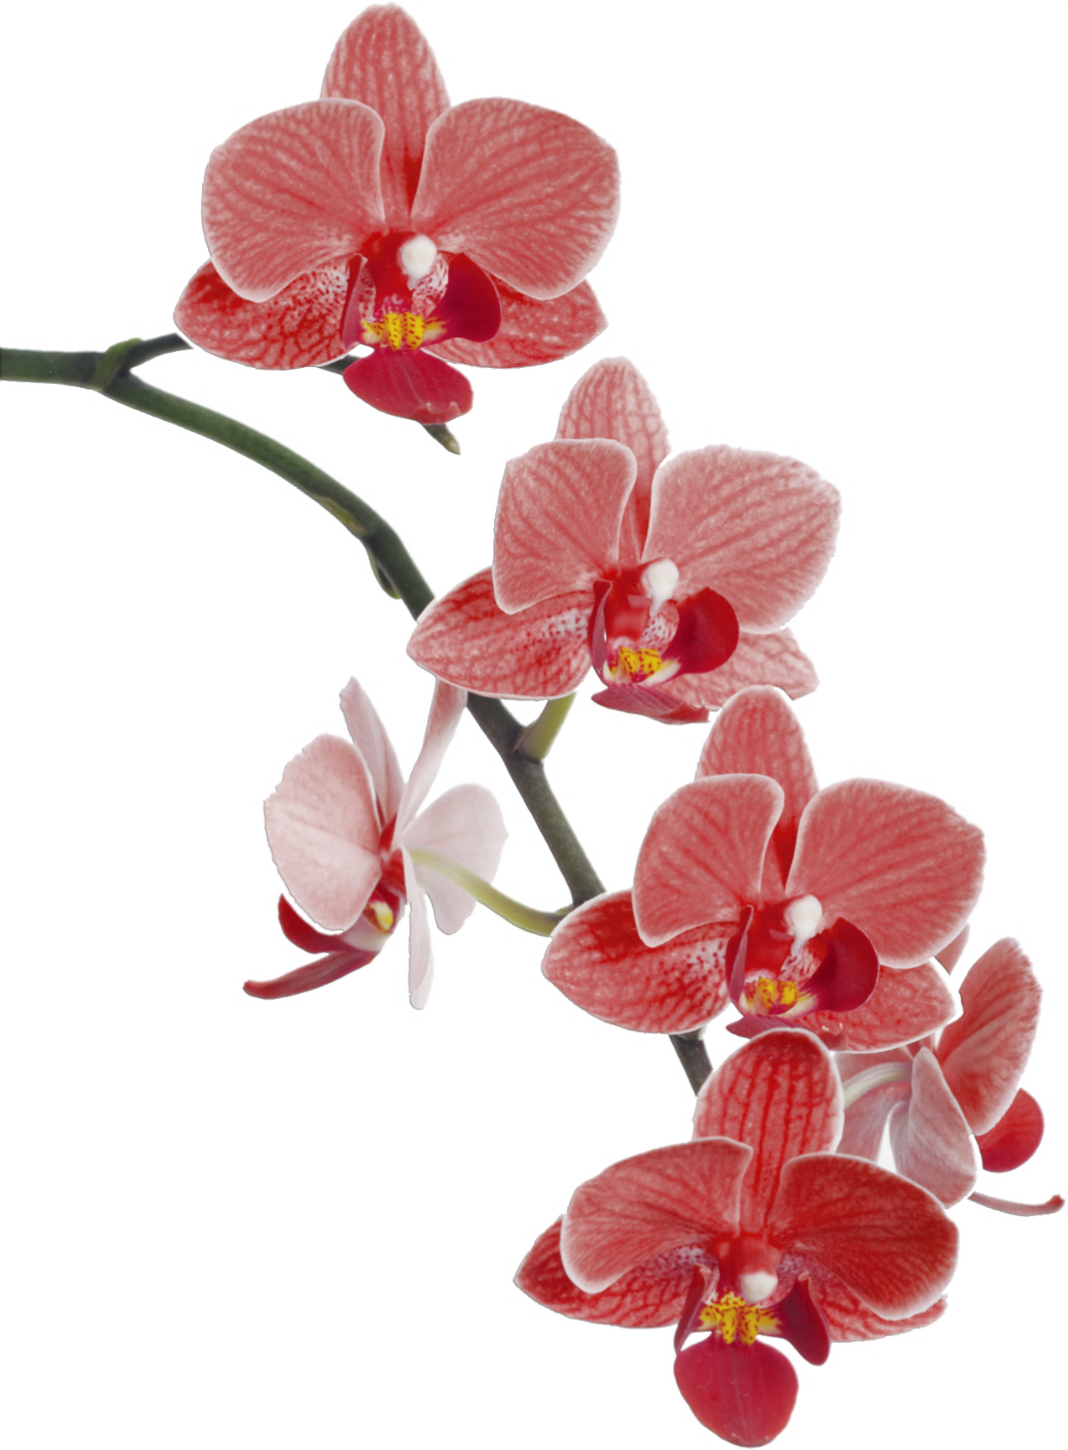 Orchid Clipart Orchid Sketch Picture 1787341 Orchid Clipart Orchid Sketch